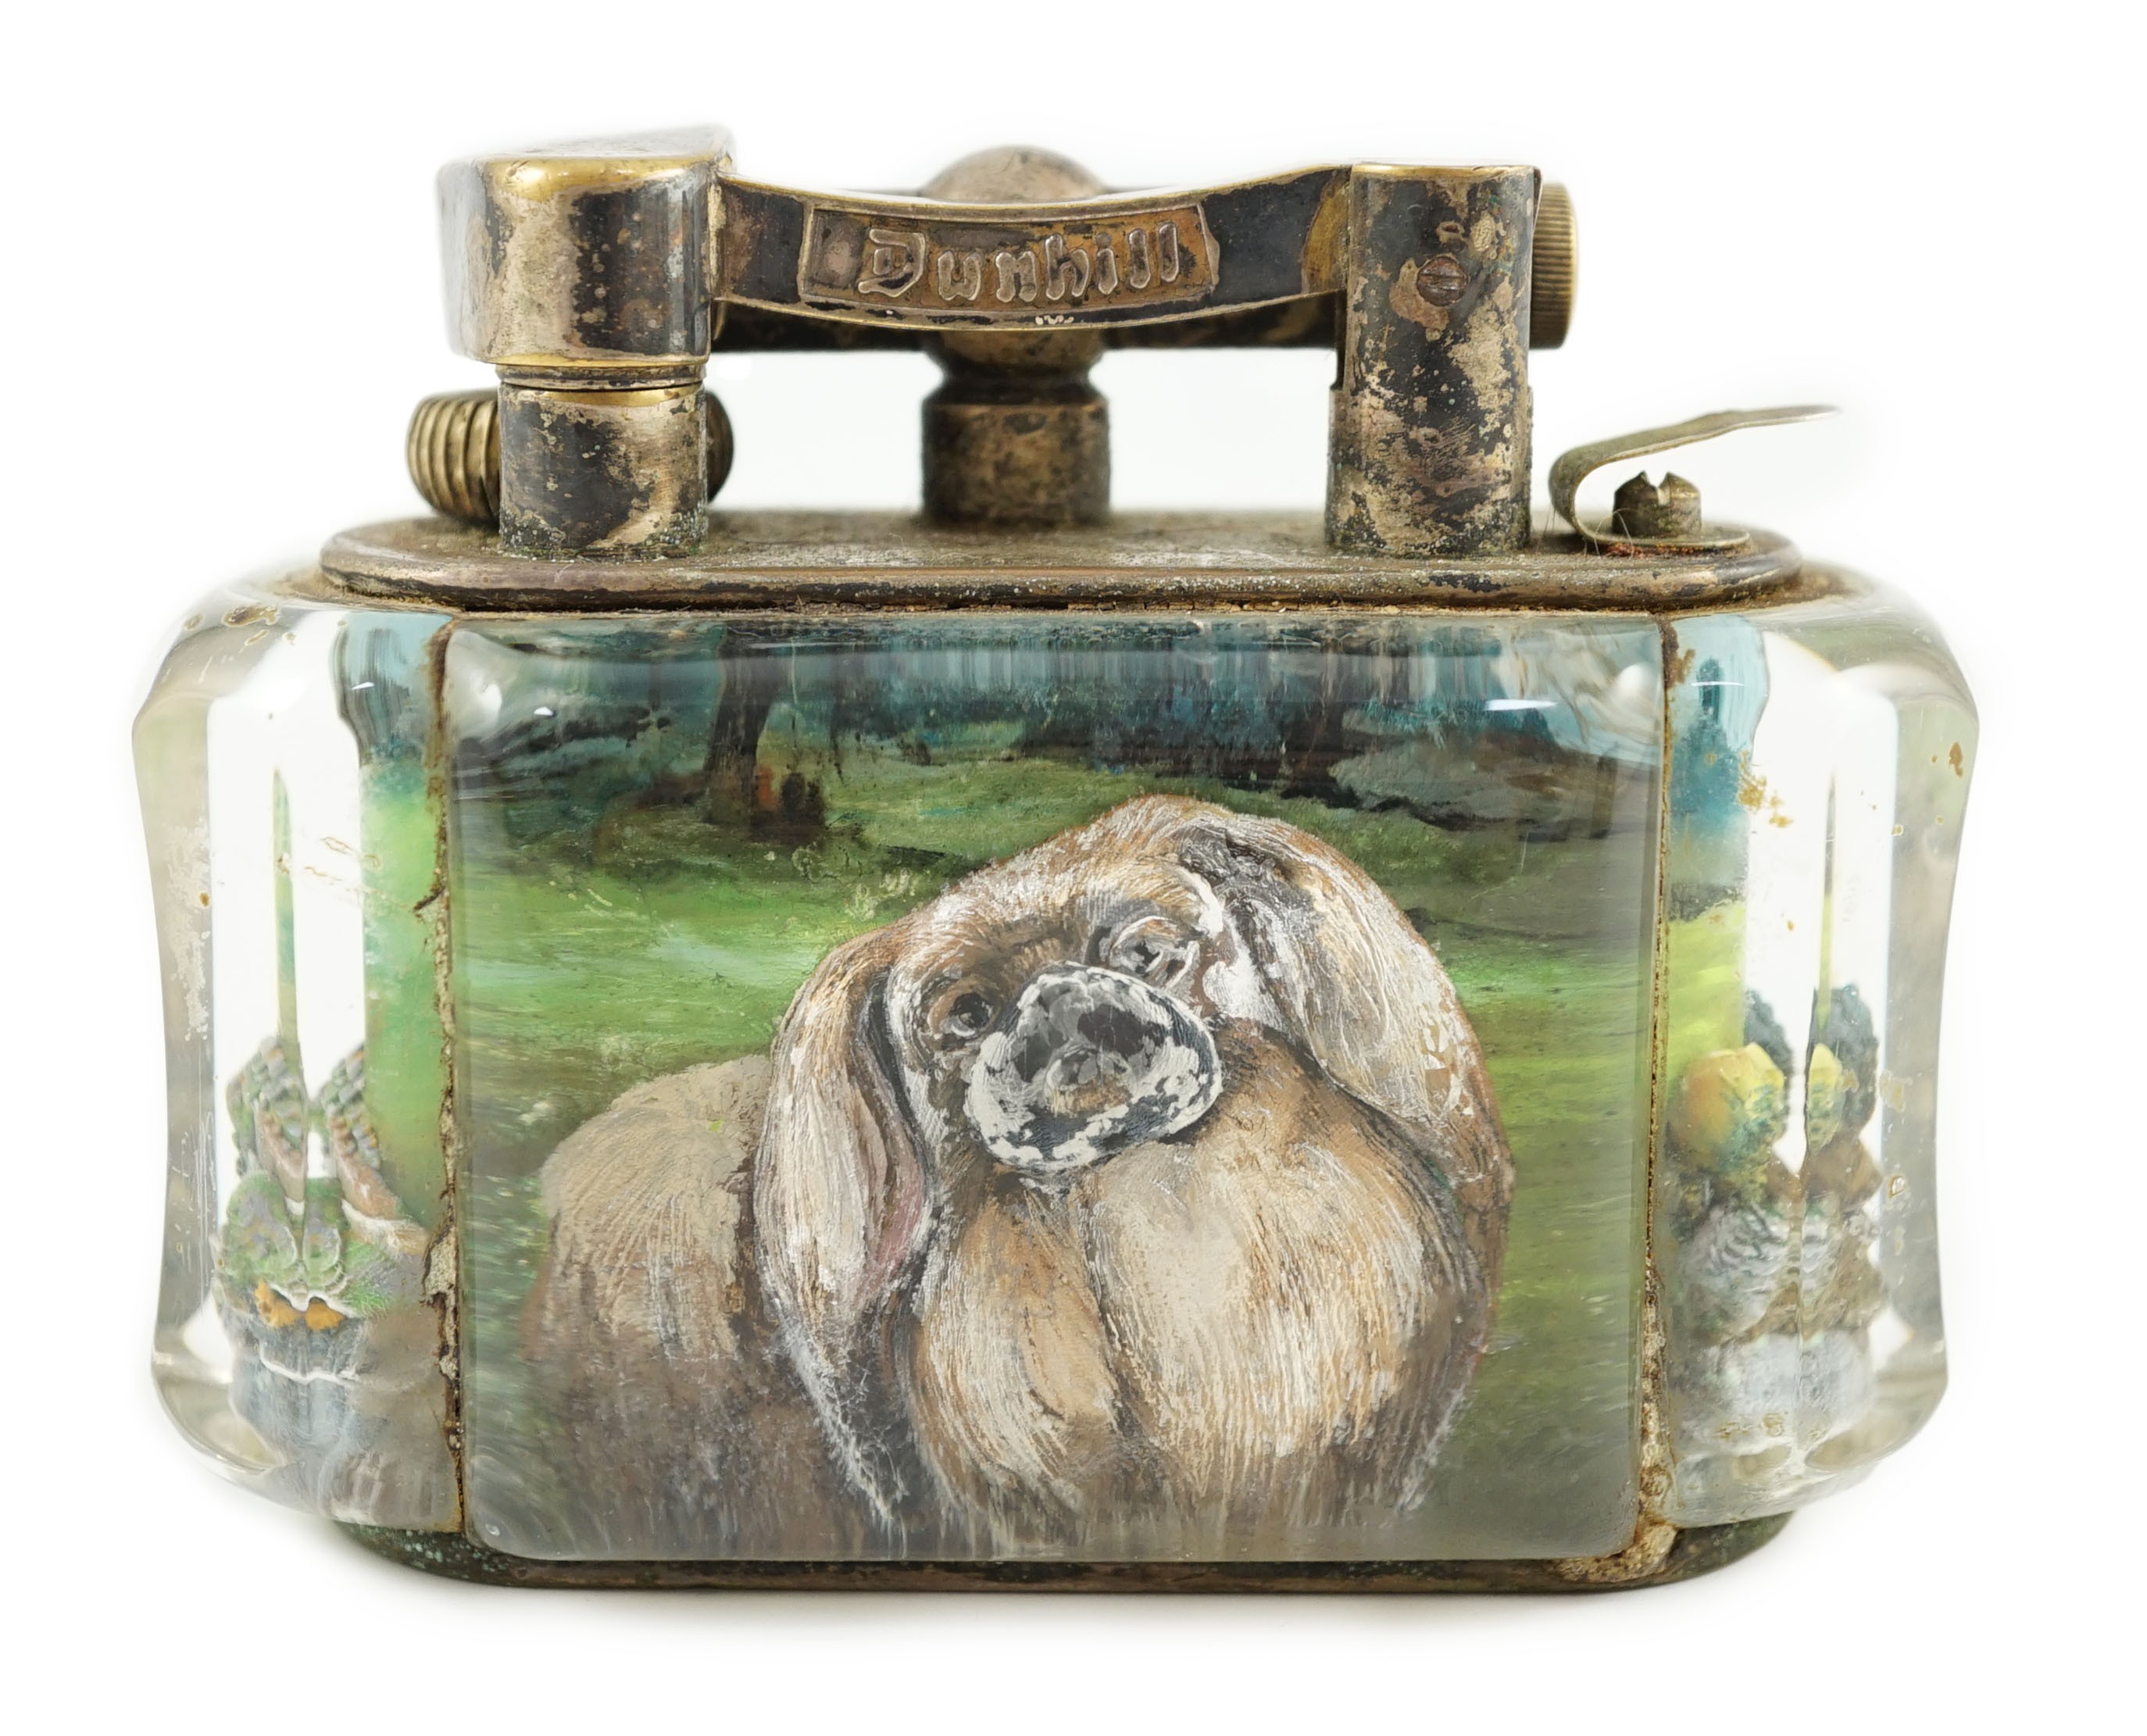 A rare Dunhill lucite cigarette lighter with unusual decoration of a Pekingese dog, width 10cm depth 5cm height 7.5cm